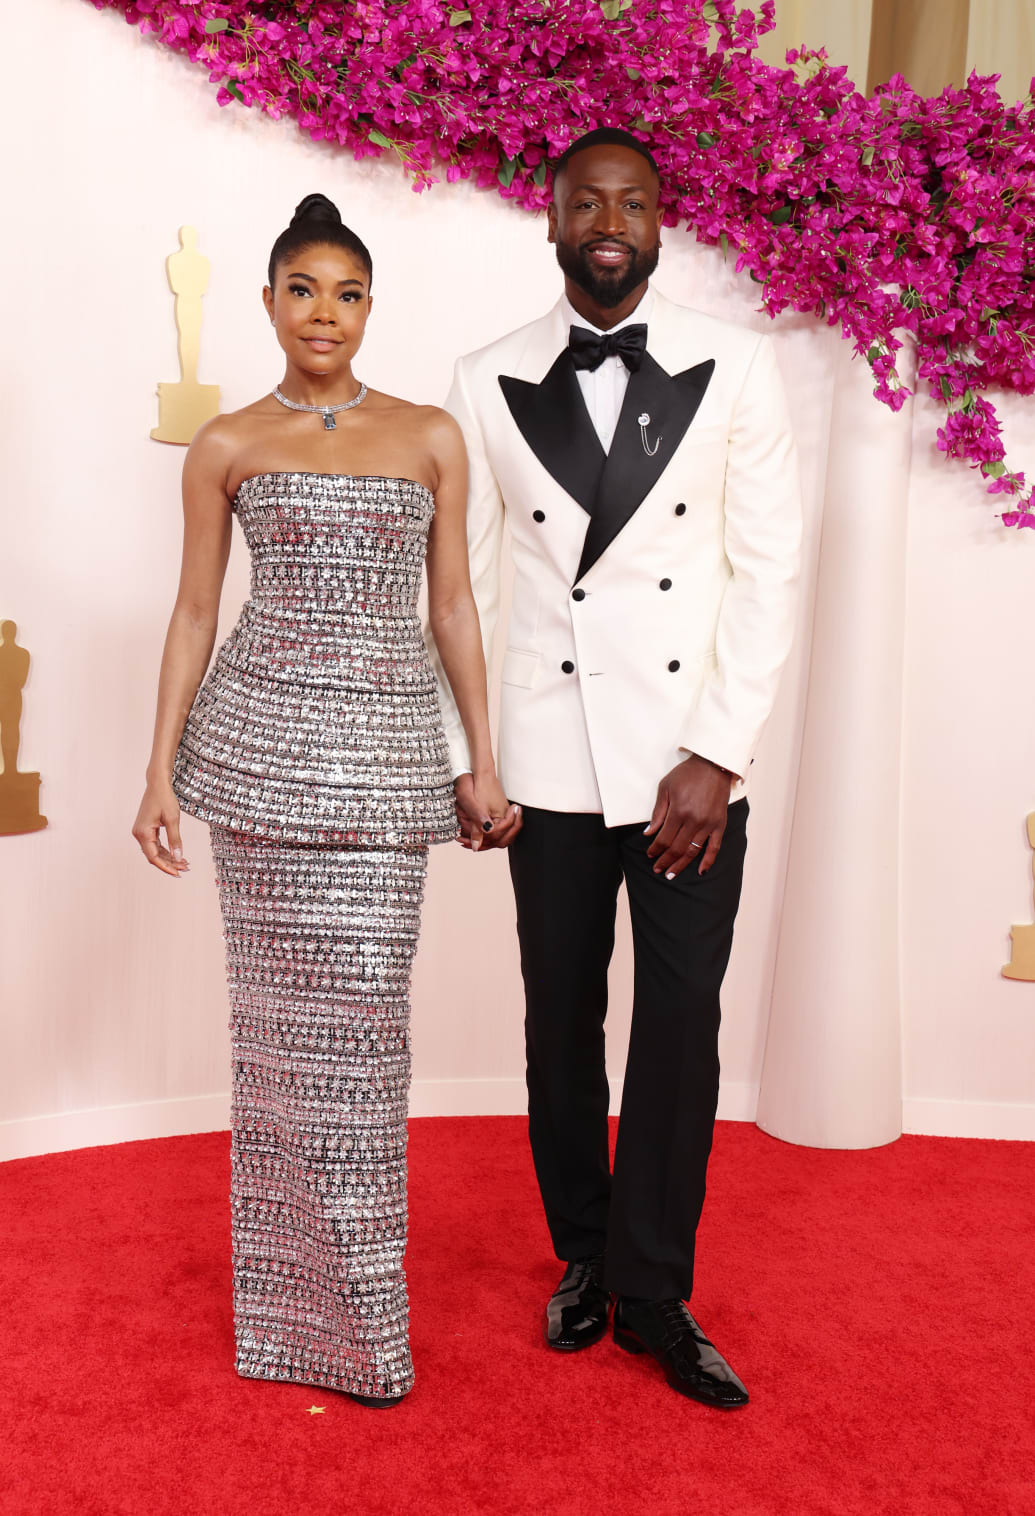 Gabrielle Union-Wade and Dwyane Wade at the Oscars